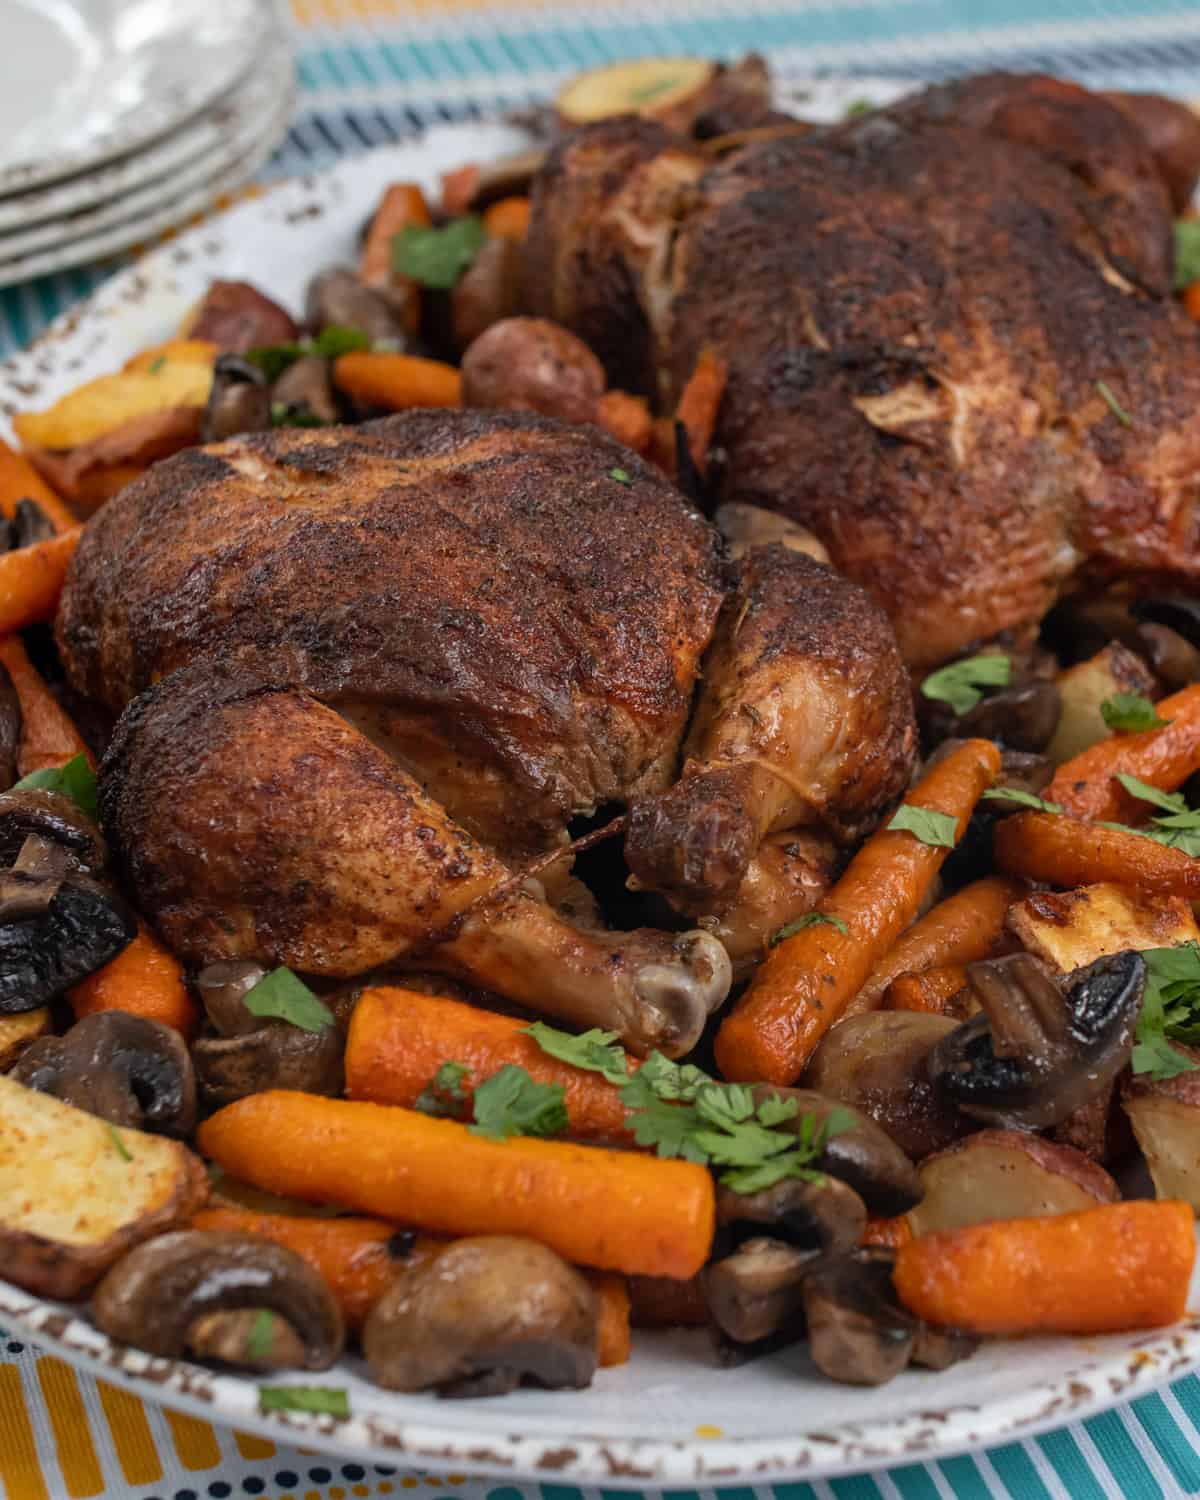 Cooked chicken with roasted potatoes, carrots and mushrooms.